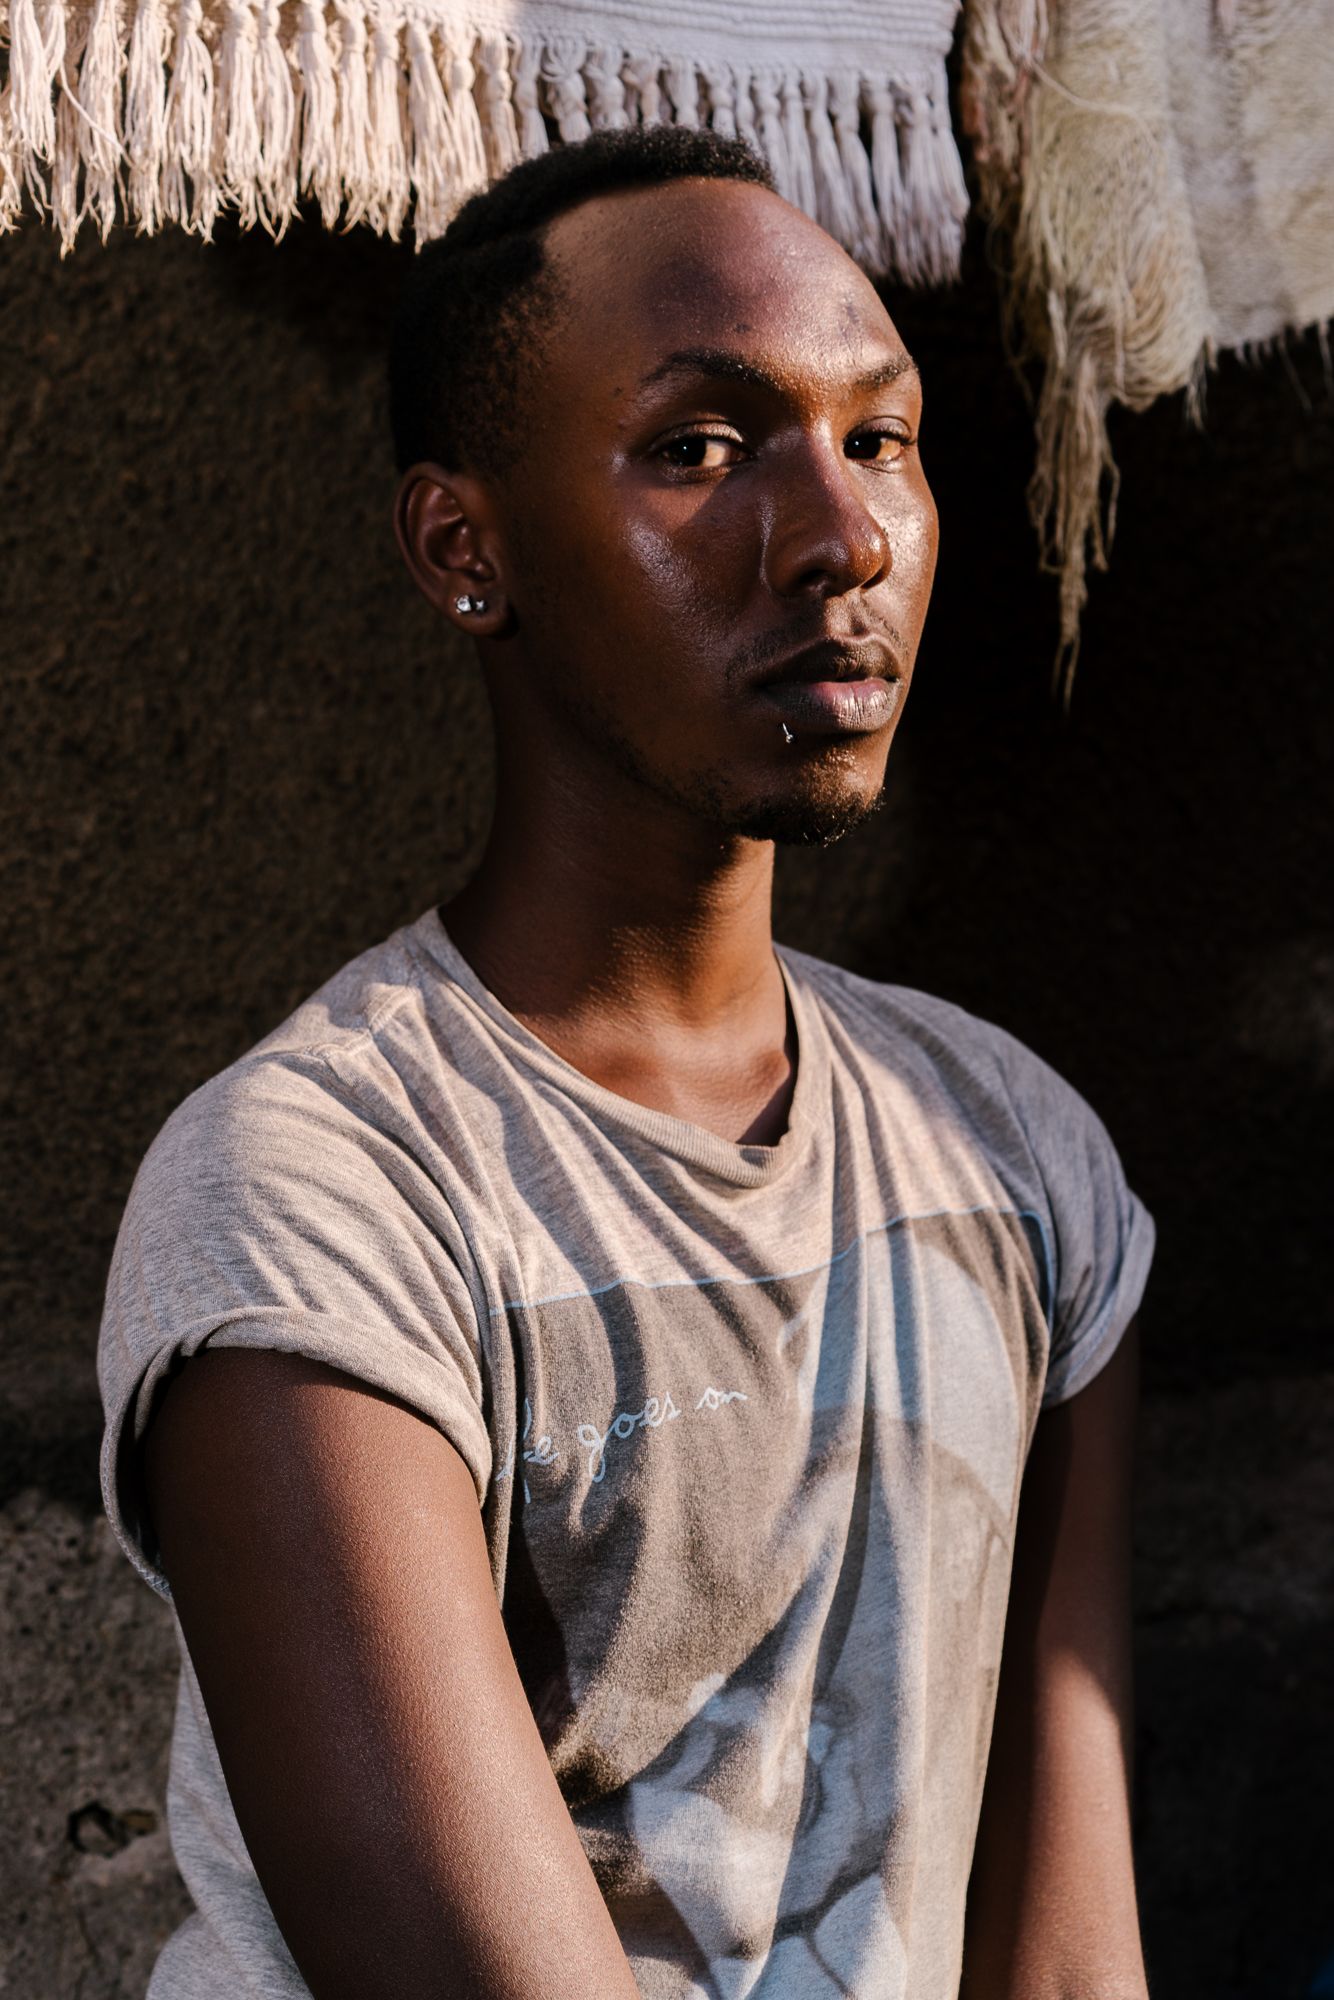 Javan, 19, a transgender woman, poses for a portrait near her mother's apartment in Kampala. She spent around eight months in Kenya as a refugee there after a mob beat her, stripped her naked and paraded her up and down the street yelling, "He's a homo," behind her near her Kampala home. Last summer, however, she returned to Uganda in order to make a stand. Image by Jake Naughton. Uganda, 2017.